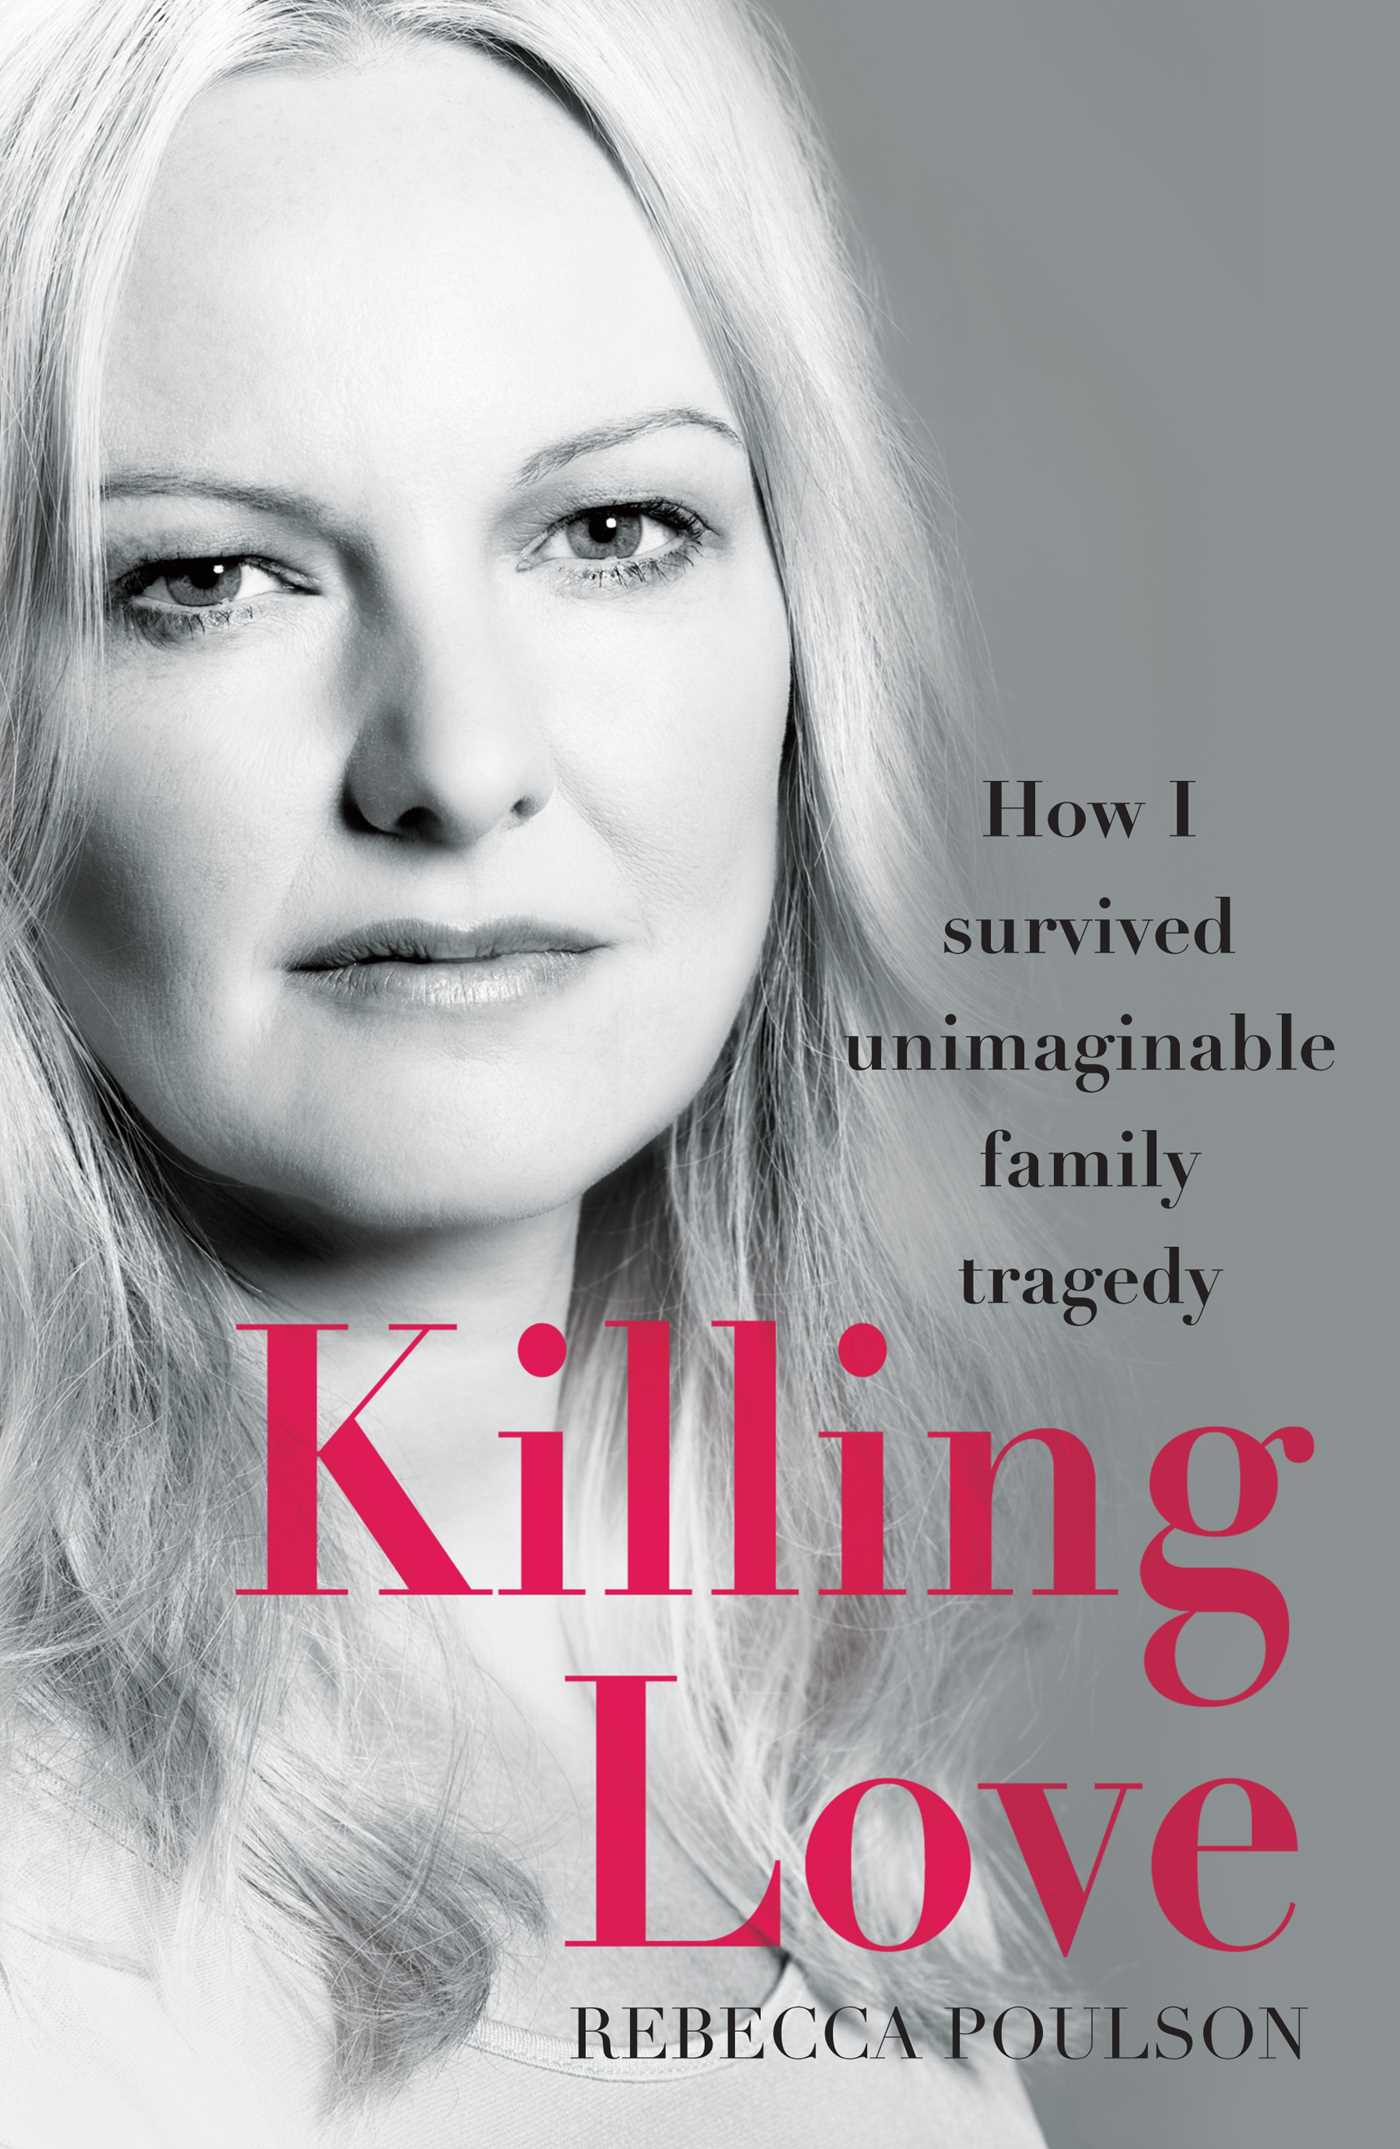 Killing Love by Rebecca Poulson: Recalling the Horrors of Family Violence